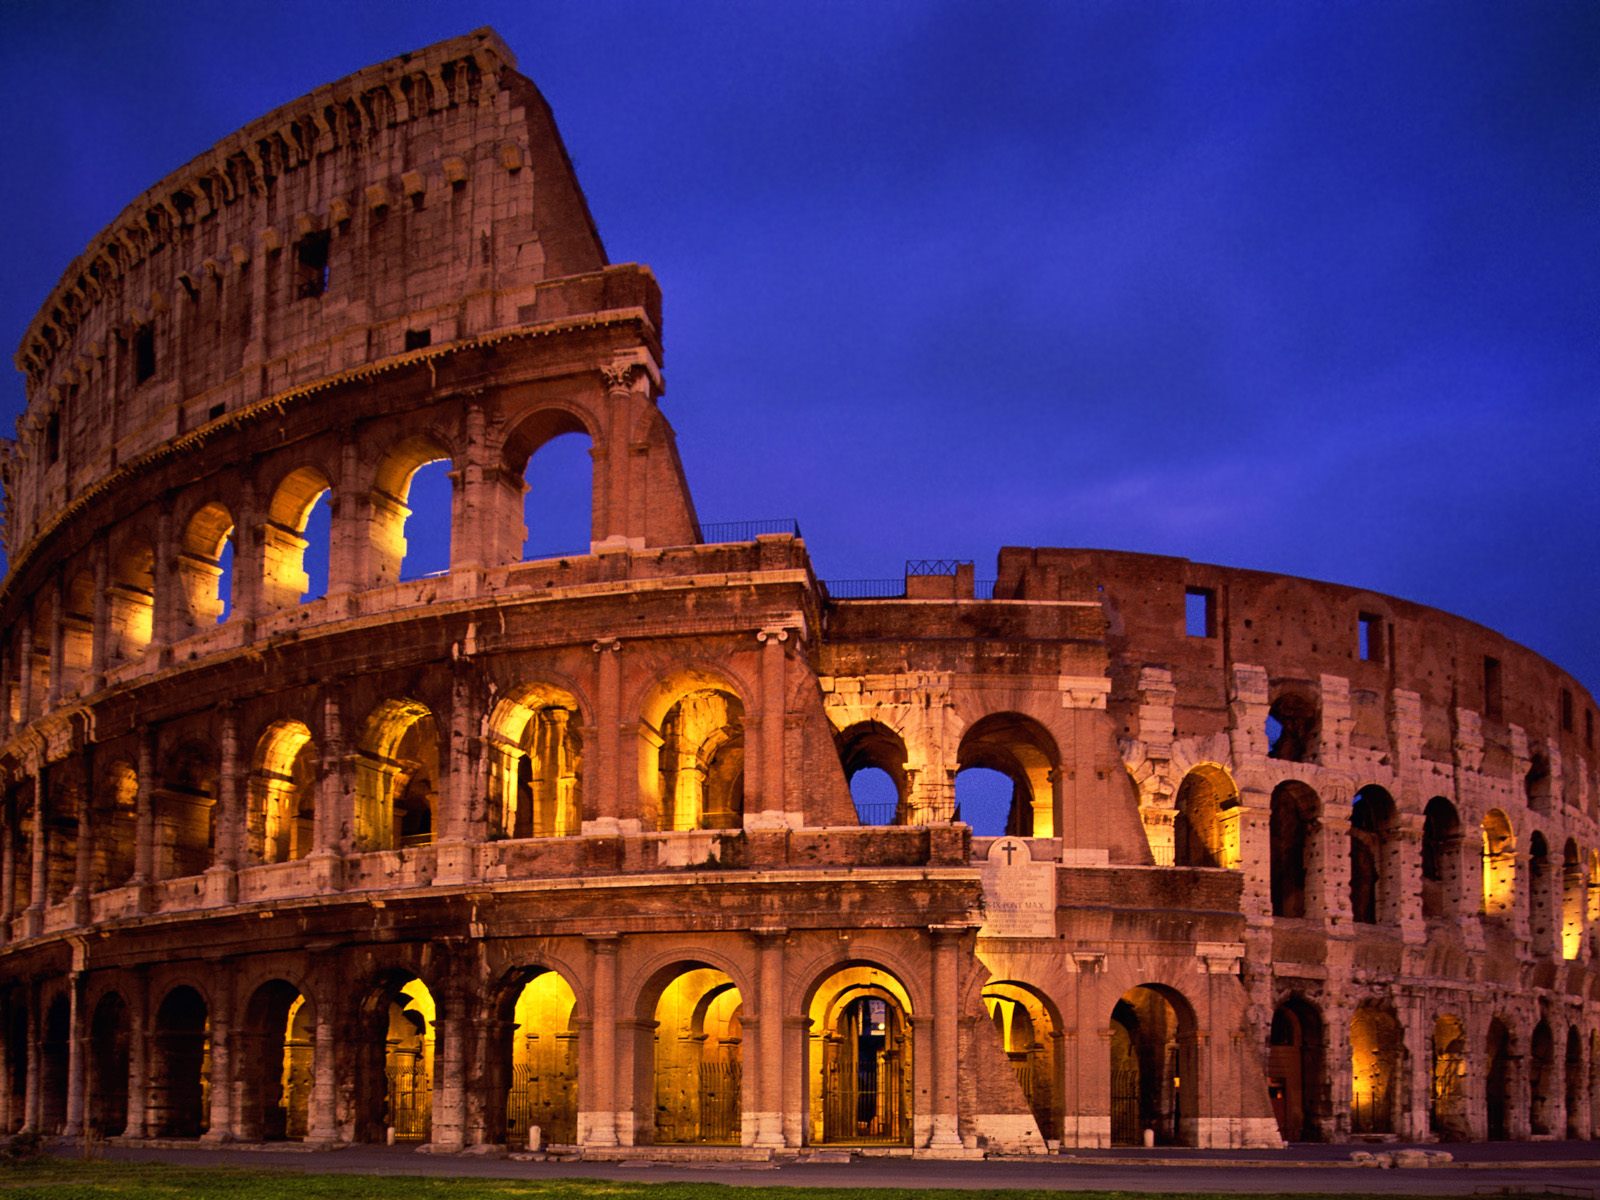 The Colosseum Rome Italy Wallpapers HD Wallpapers